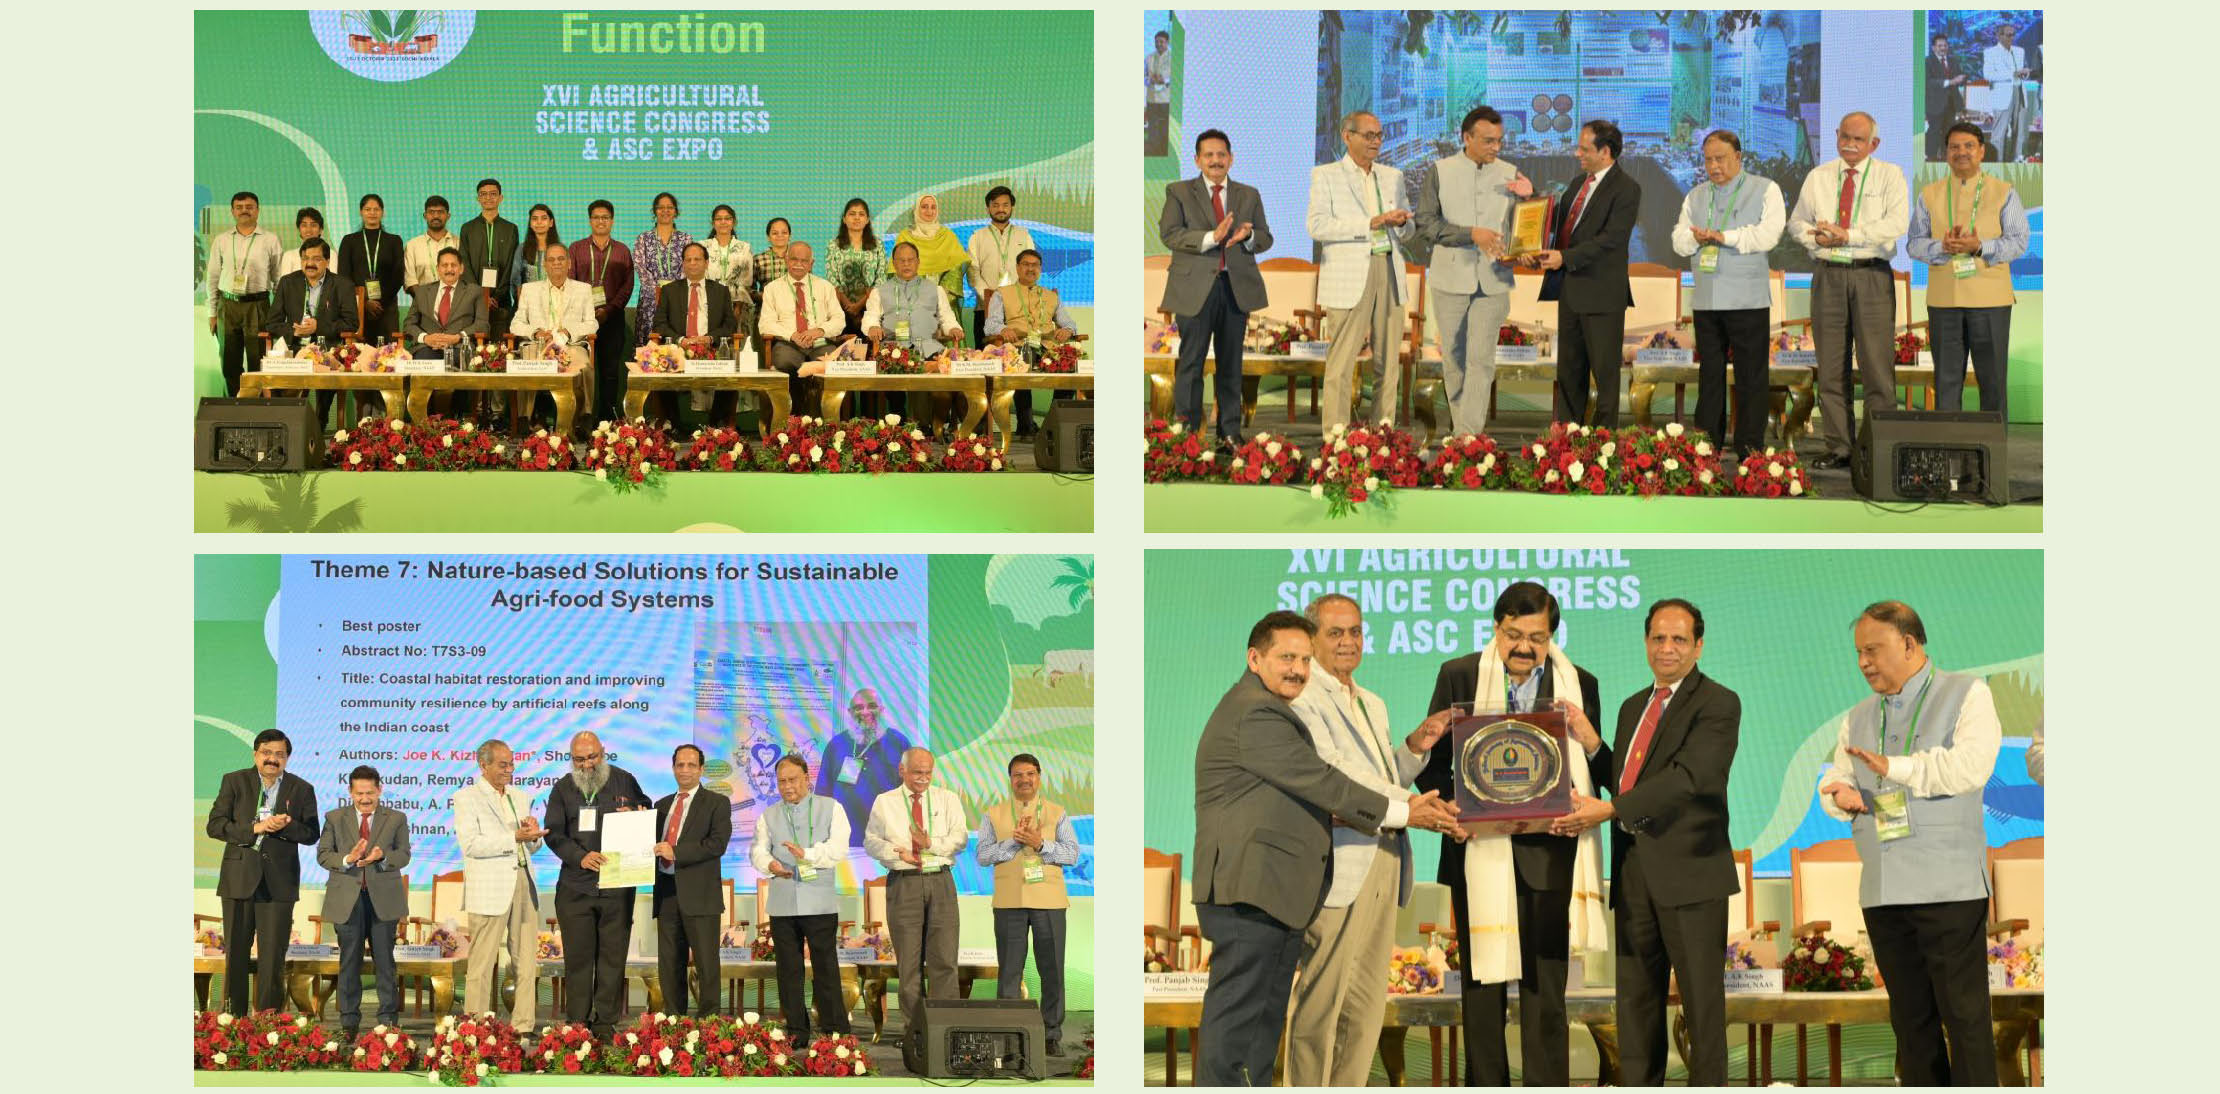 Valedictory Function of XVI Agricultural Science Congress